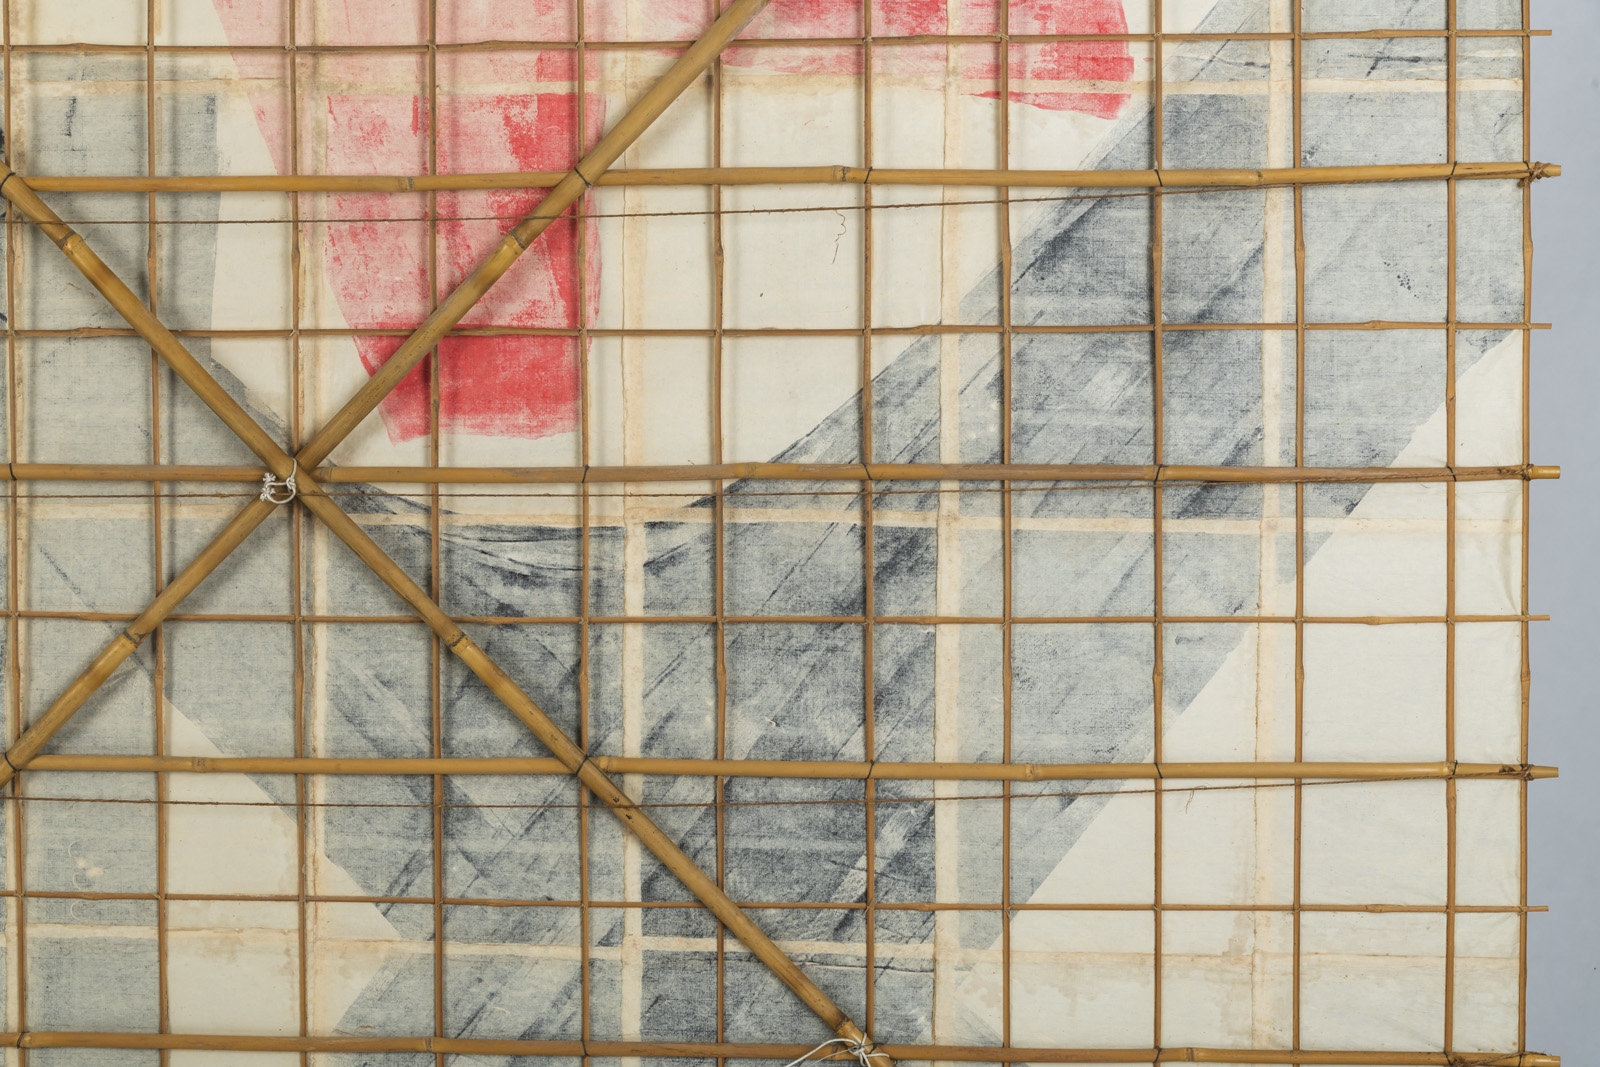 Artwork by Eberhard Fiebig, Ionization, Made of Tempera on Japanese paper